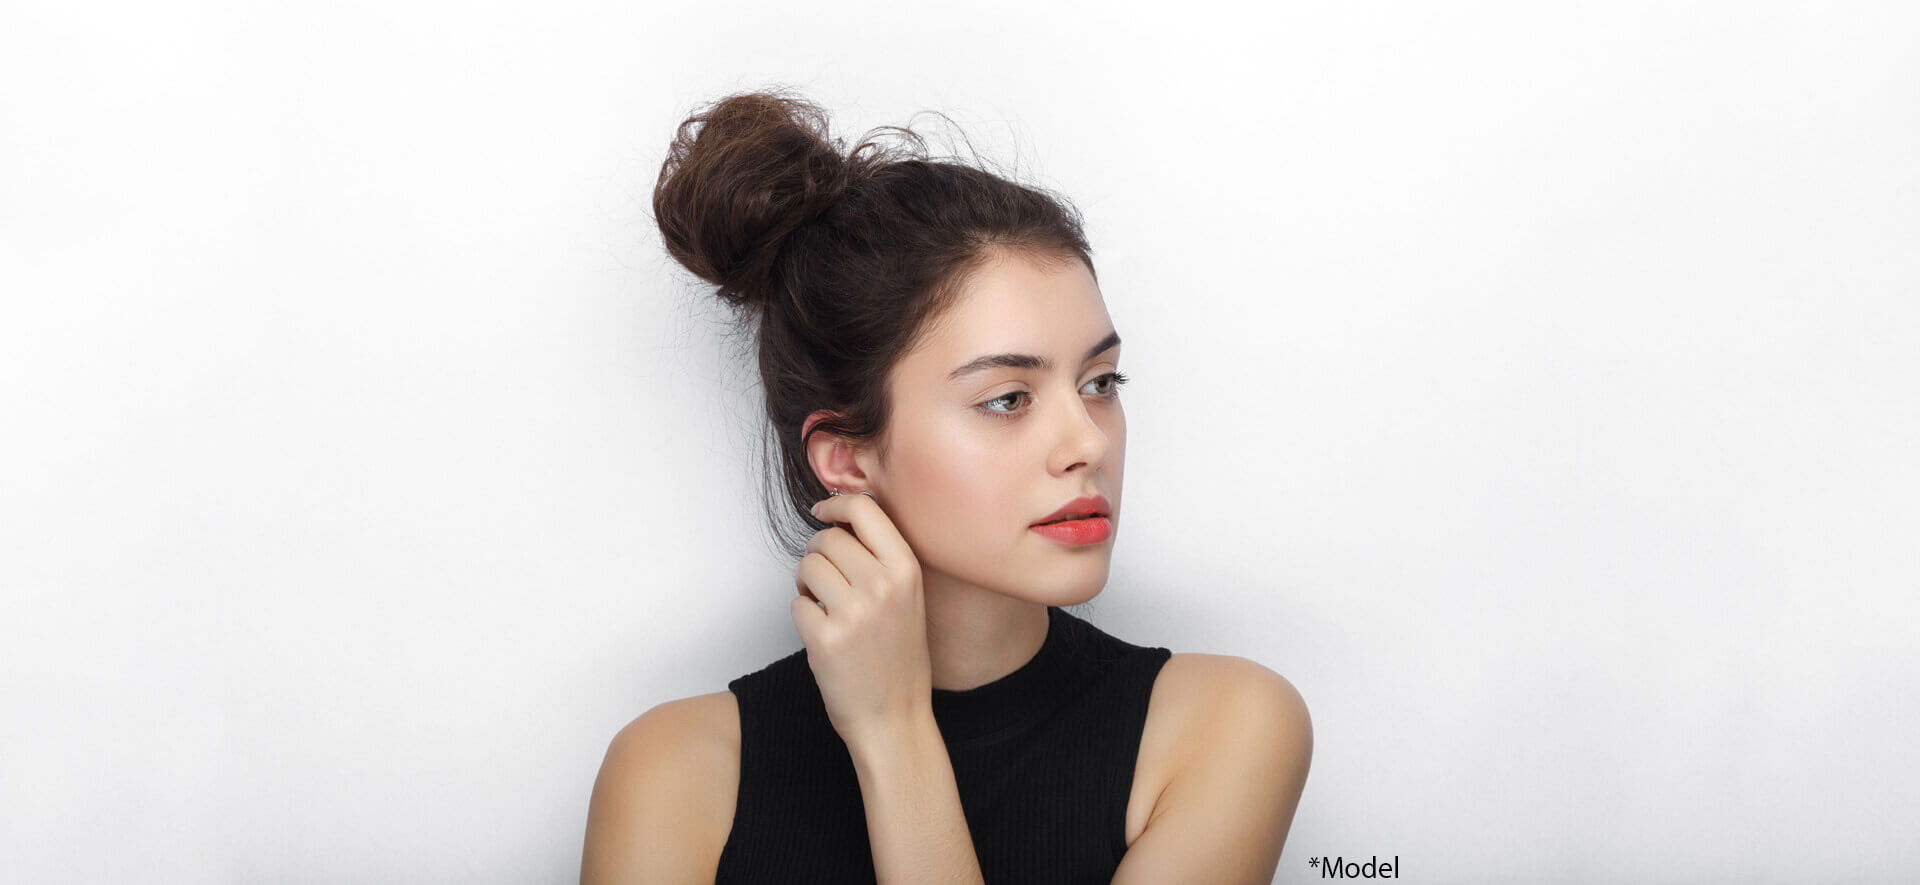 Beauty portrait of young adorable fresh looking brunette woman with high bun hairdo touching her ear